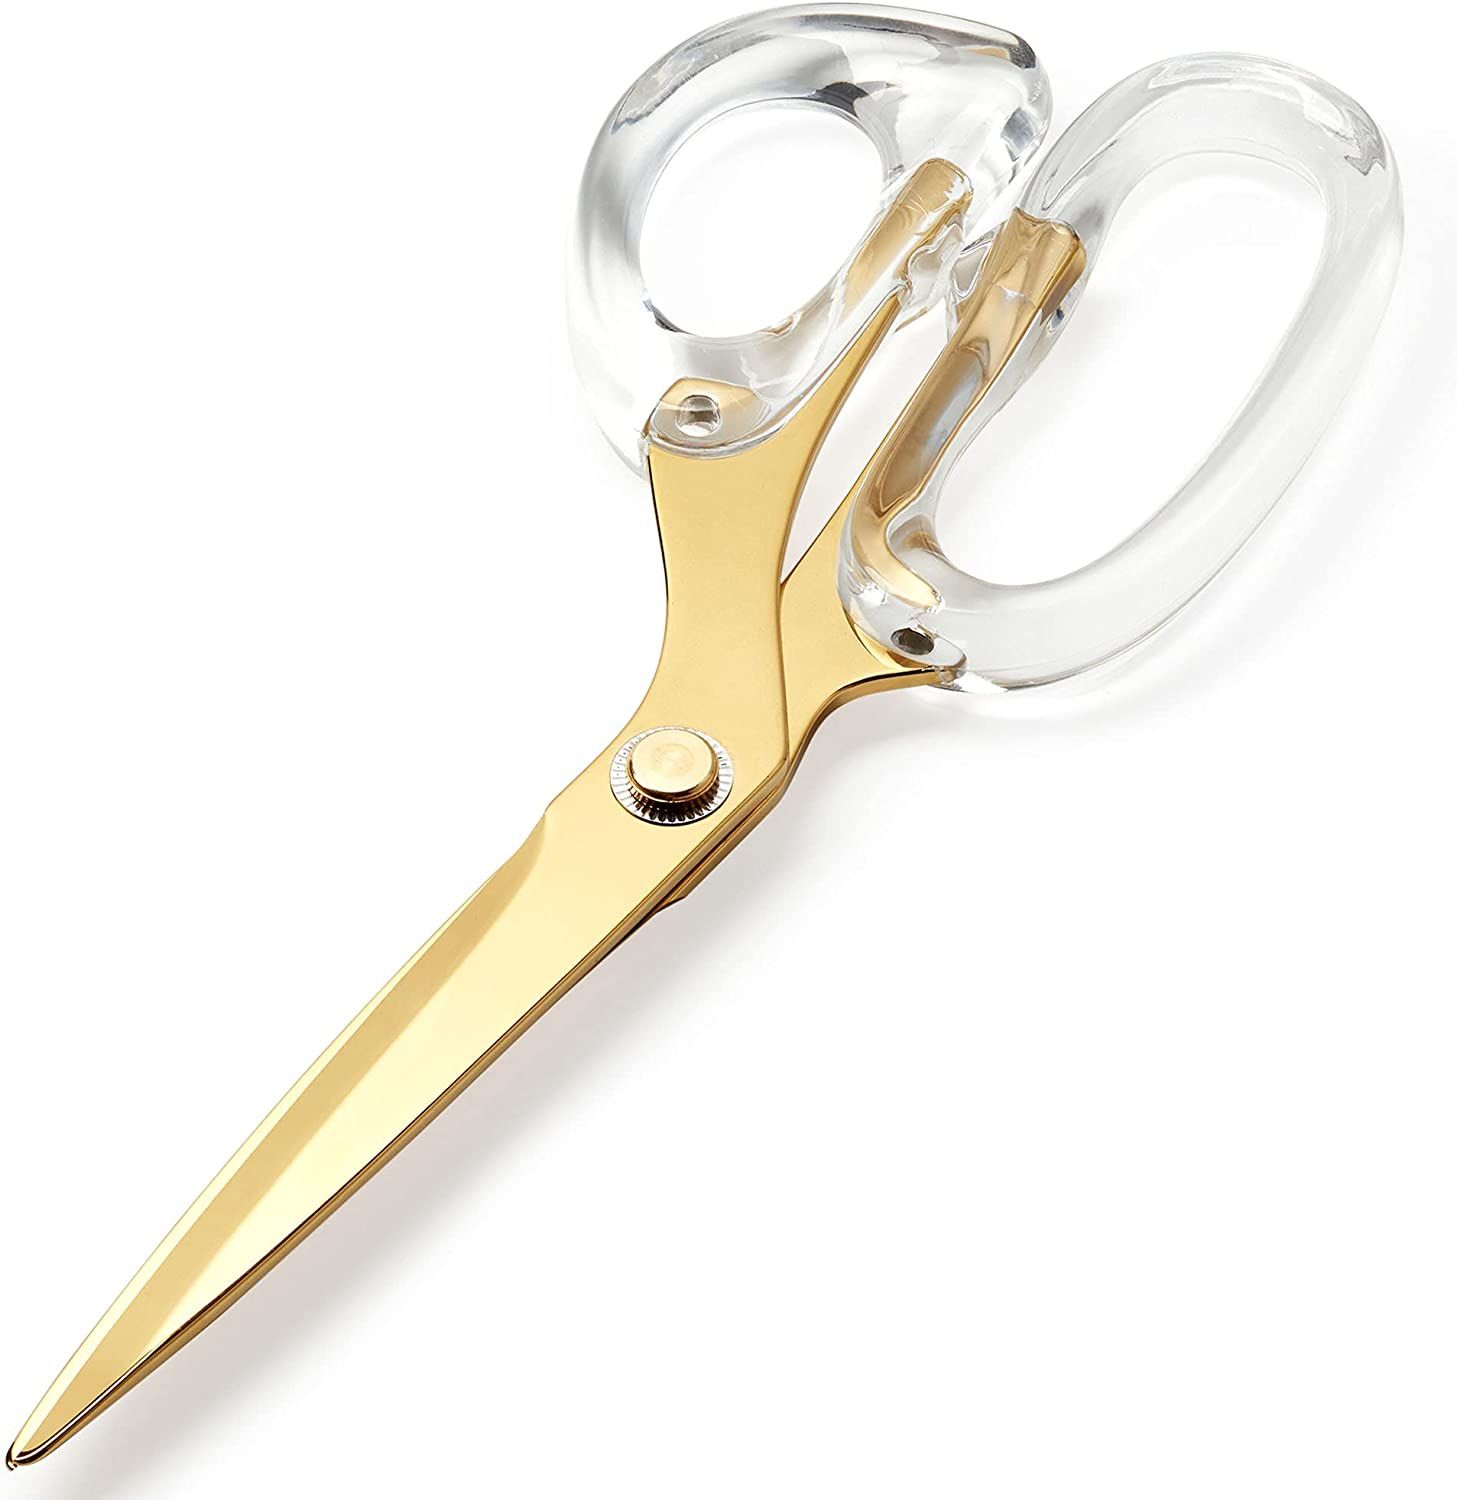 Acrylic Scissors - 9" Gold Stainless Steel Scissors for Office, Home, School - Sewing, Arts & Cra... | Amazon (US)